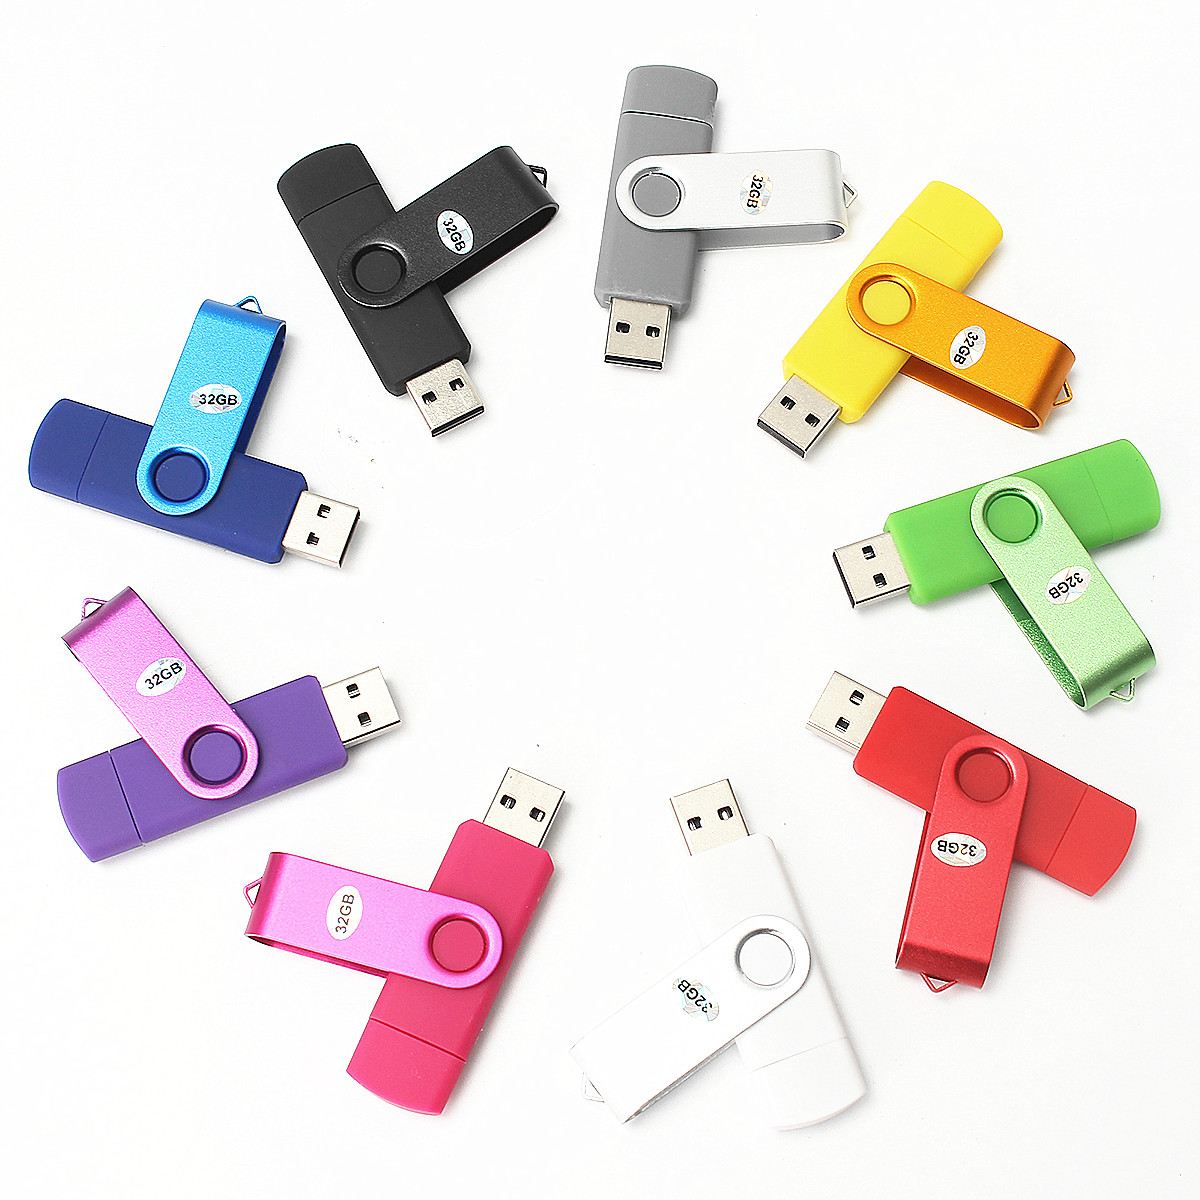 

Mini Candy 8GB Dual Use Flash Memory USB 2.0 OTG Adapter Micro USB U Disk for Cell Phone PC